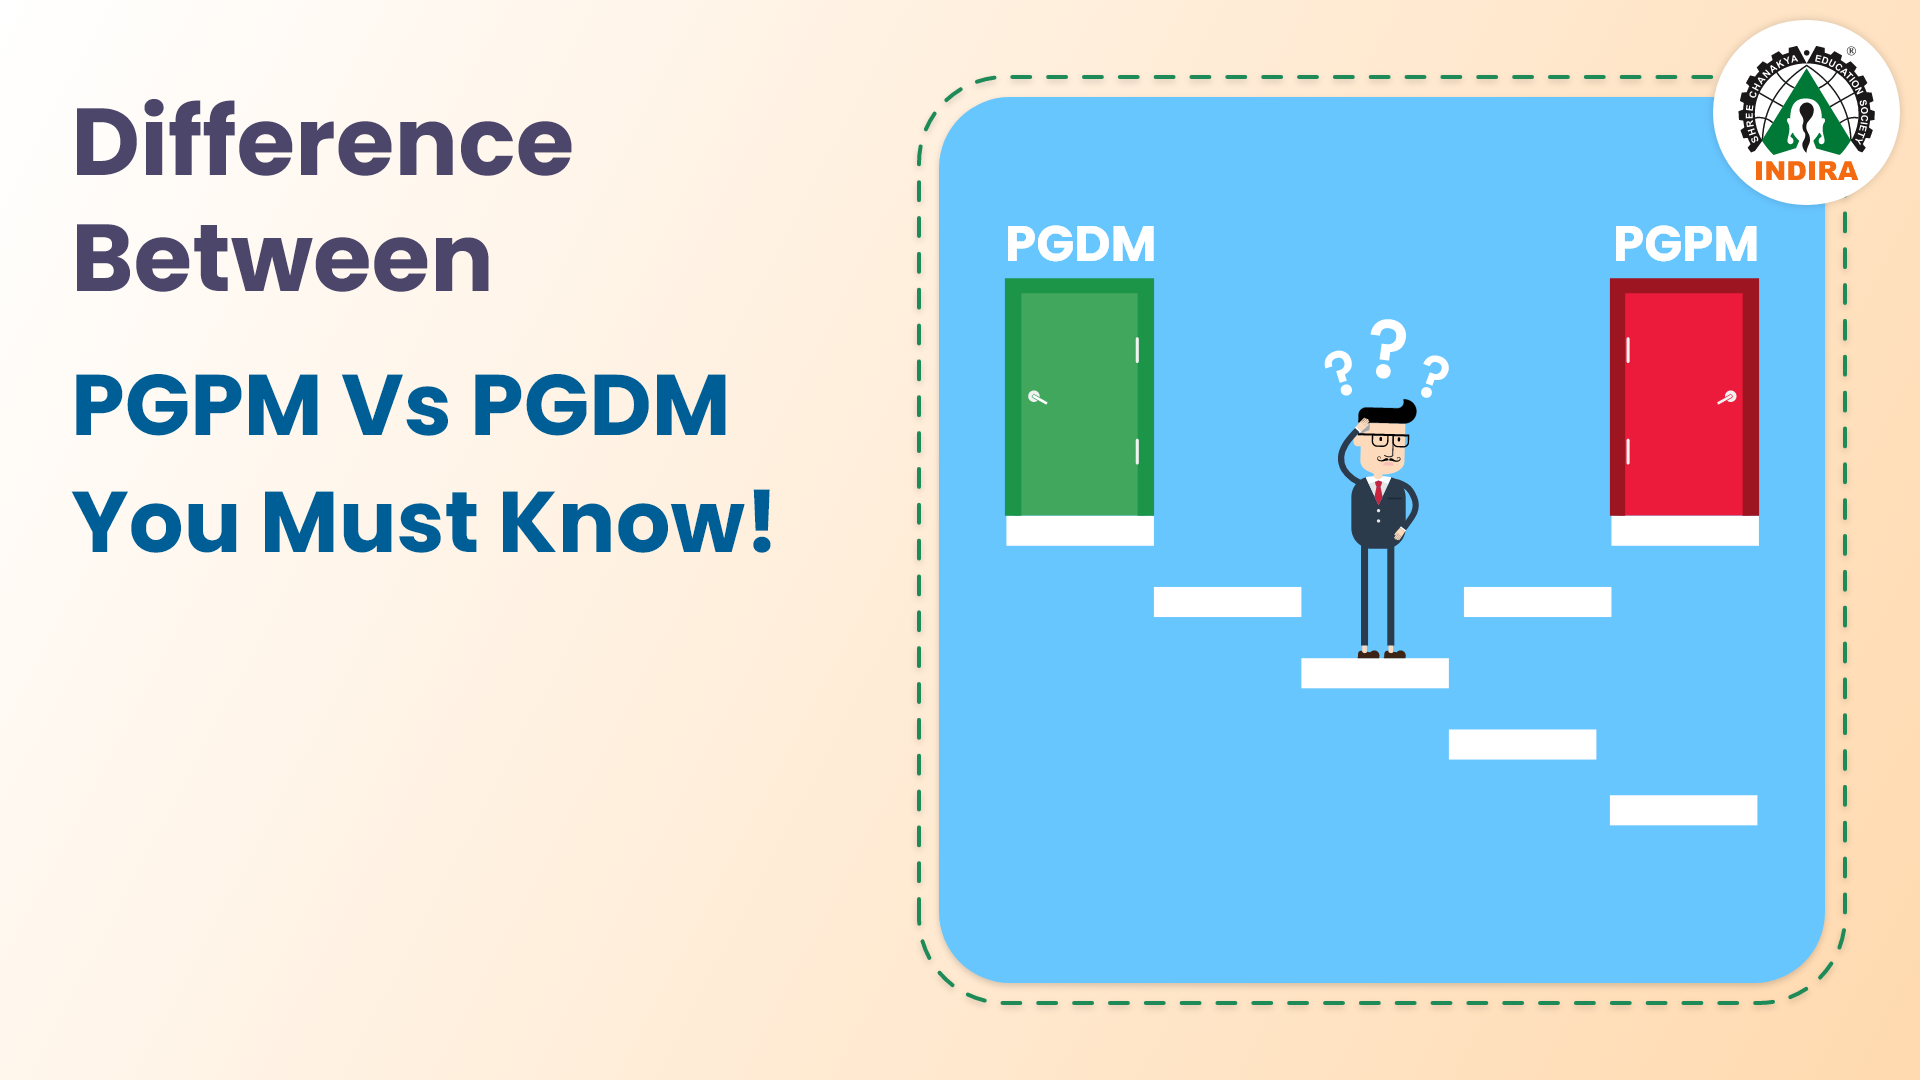 Difference Between PGPM vs PGDM You Must Know!